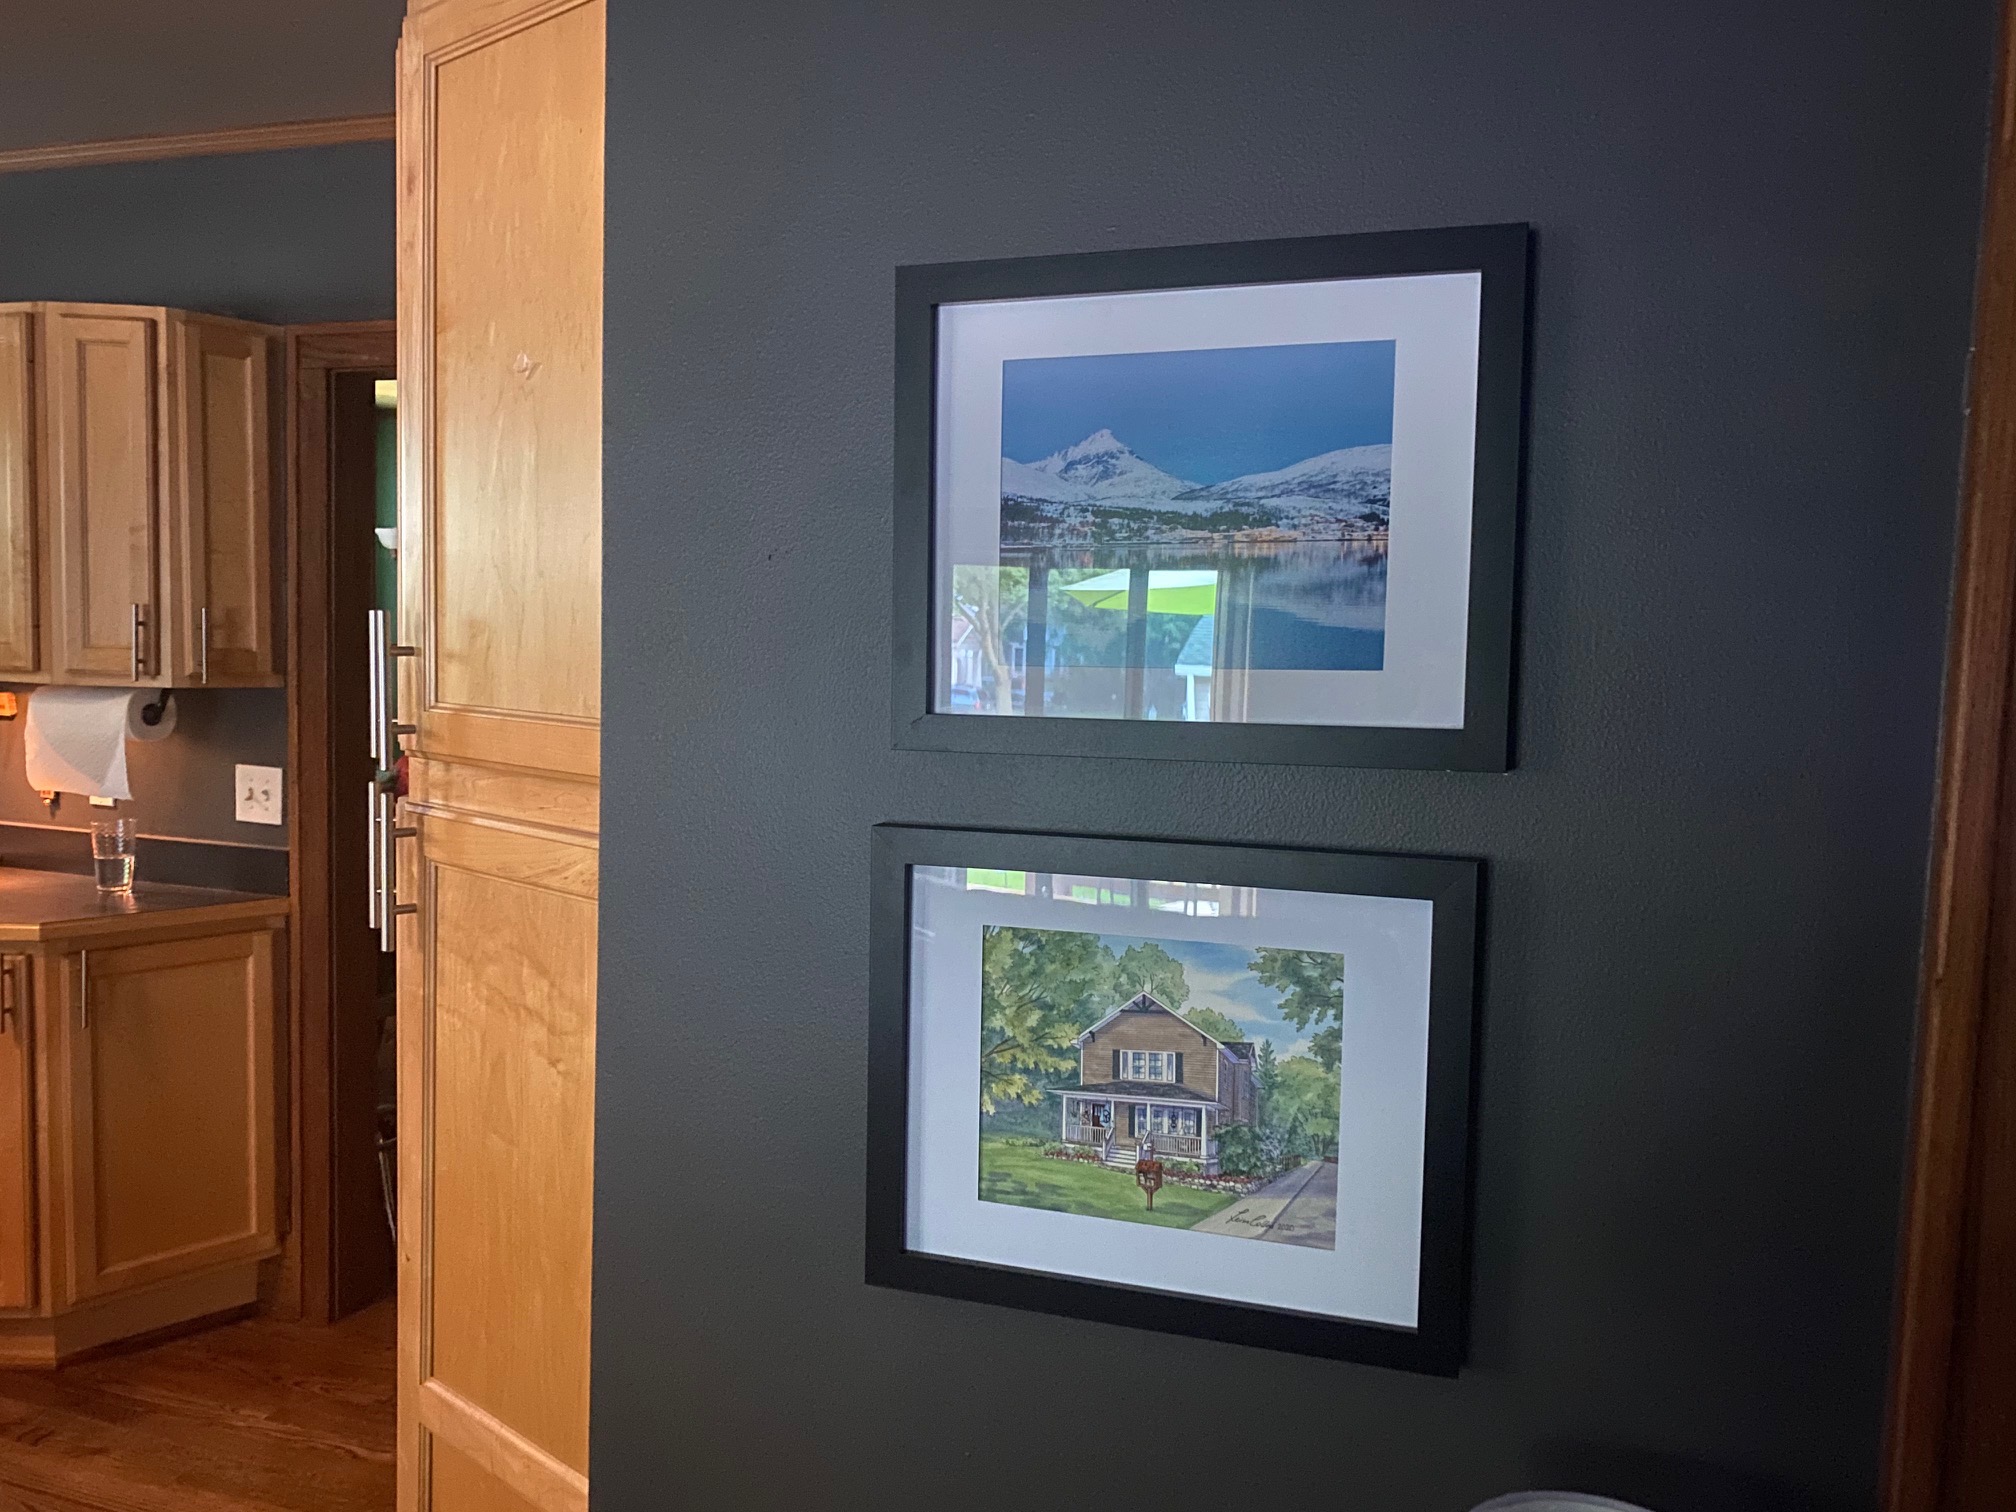 My client Steve in Royal Oak MI displays his house portrait at the entrance to the kitchen